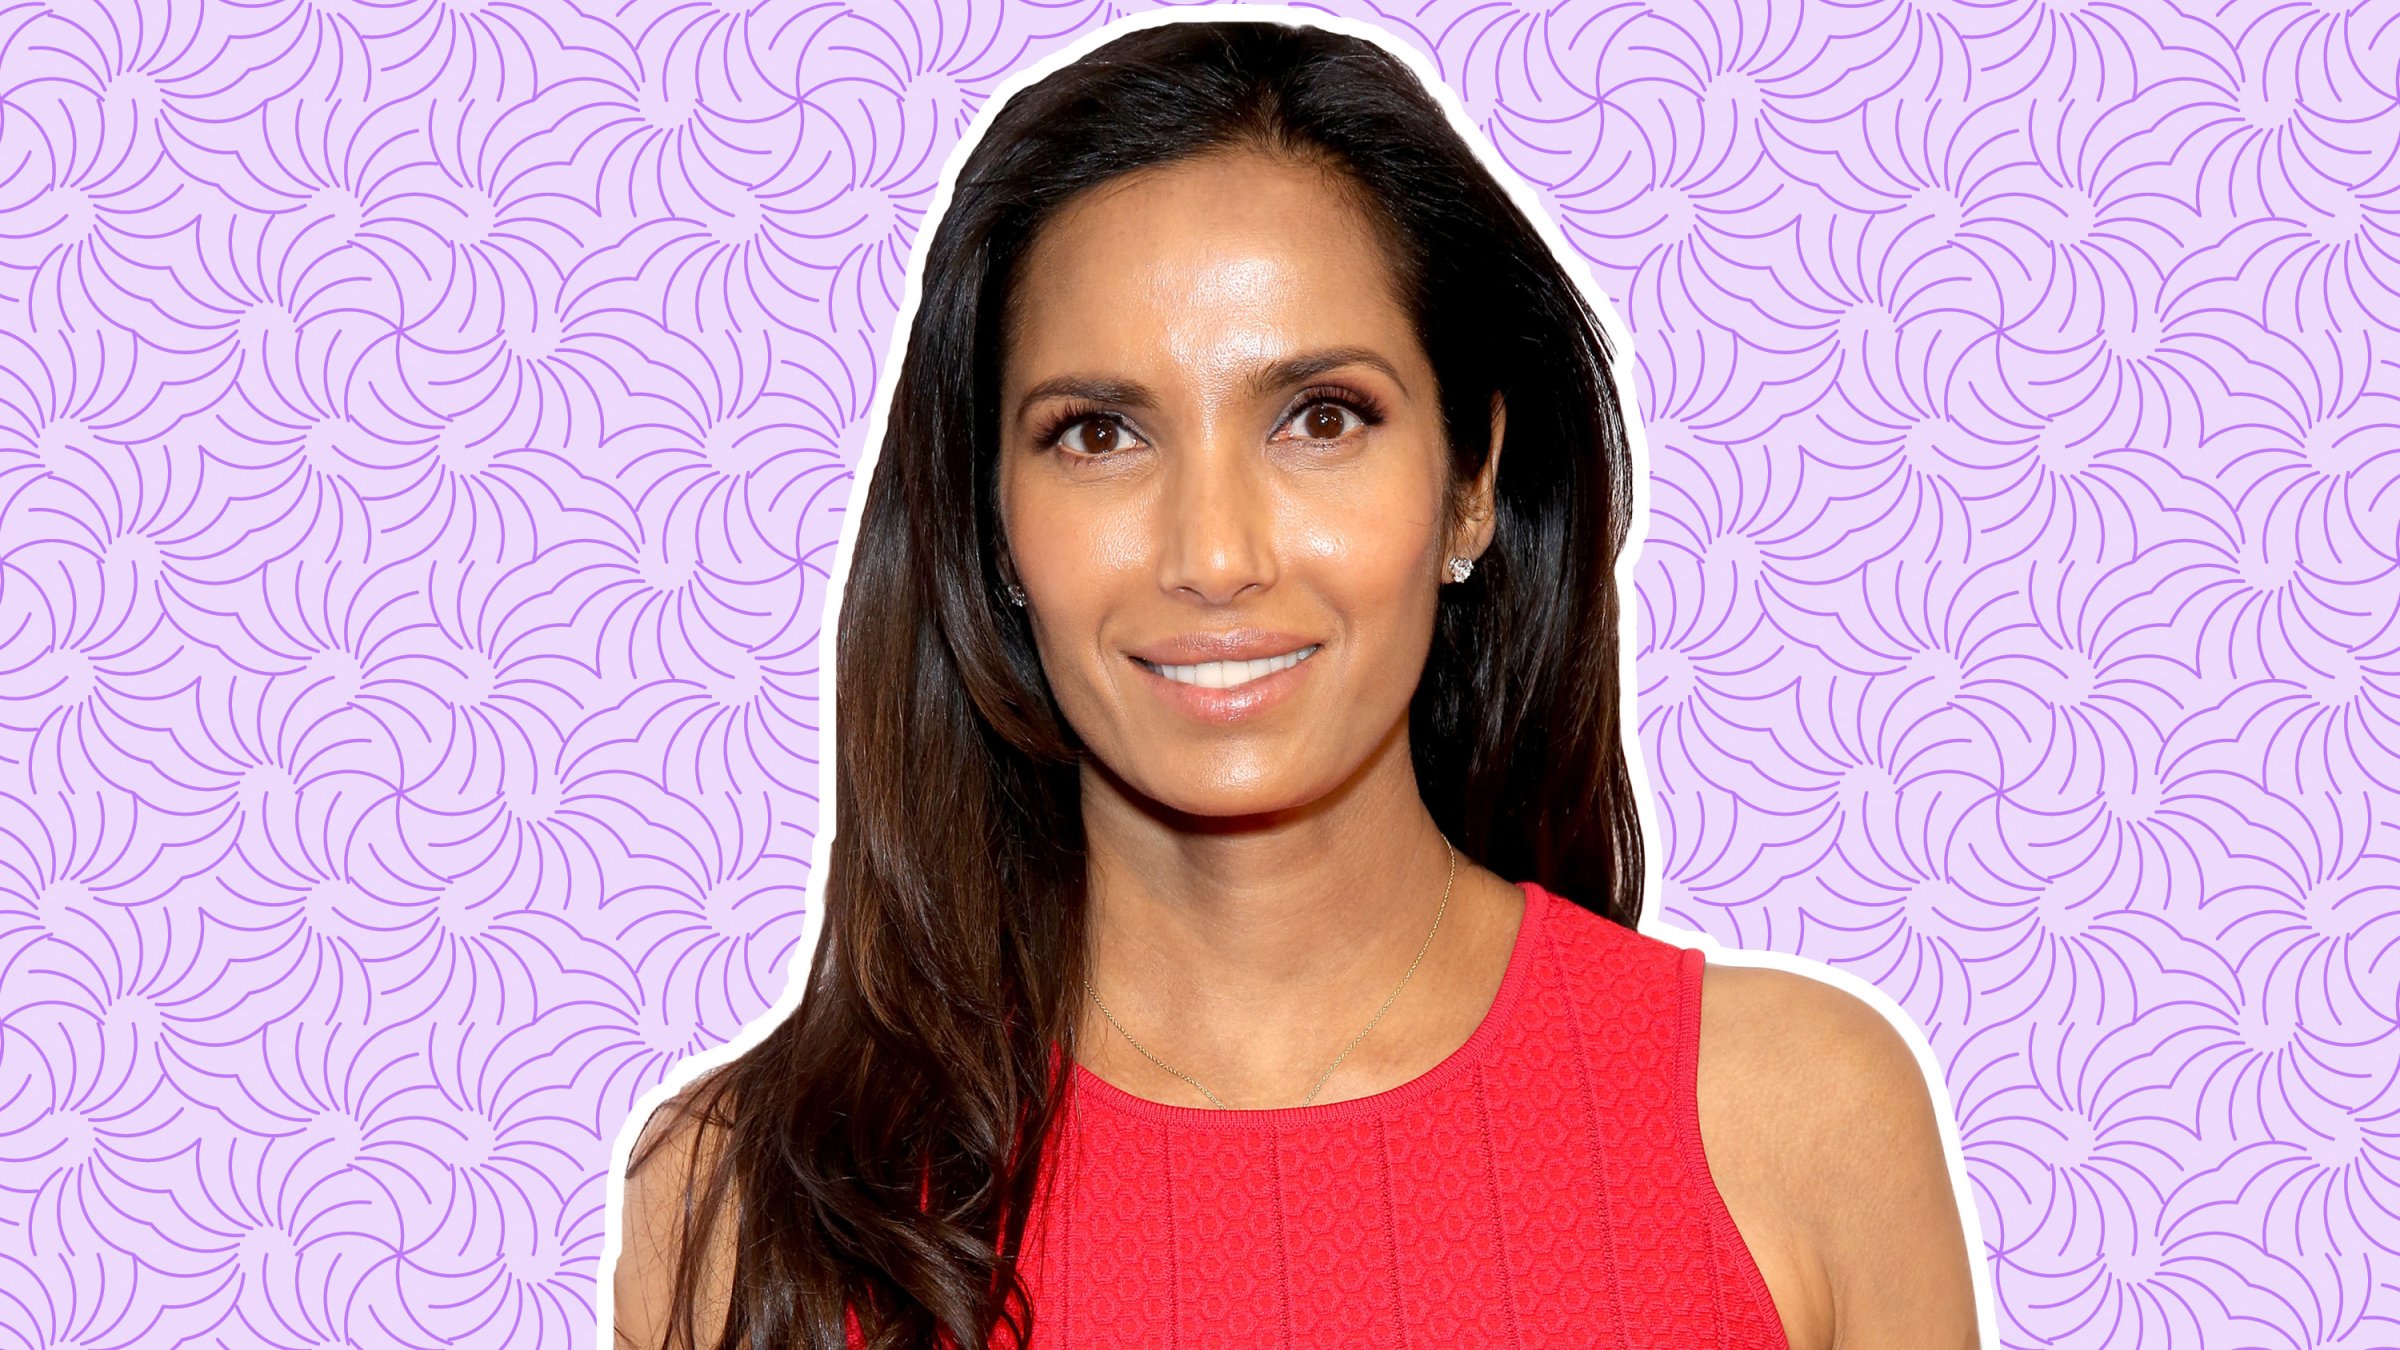 Padma Lakshmi attends the Moves Power Forum 2016 held at Steinway Hall on April 6, 2016 in New York City.